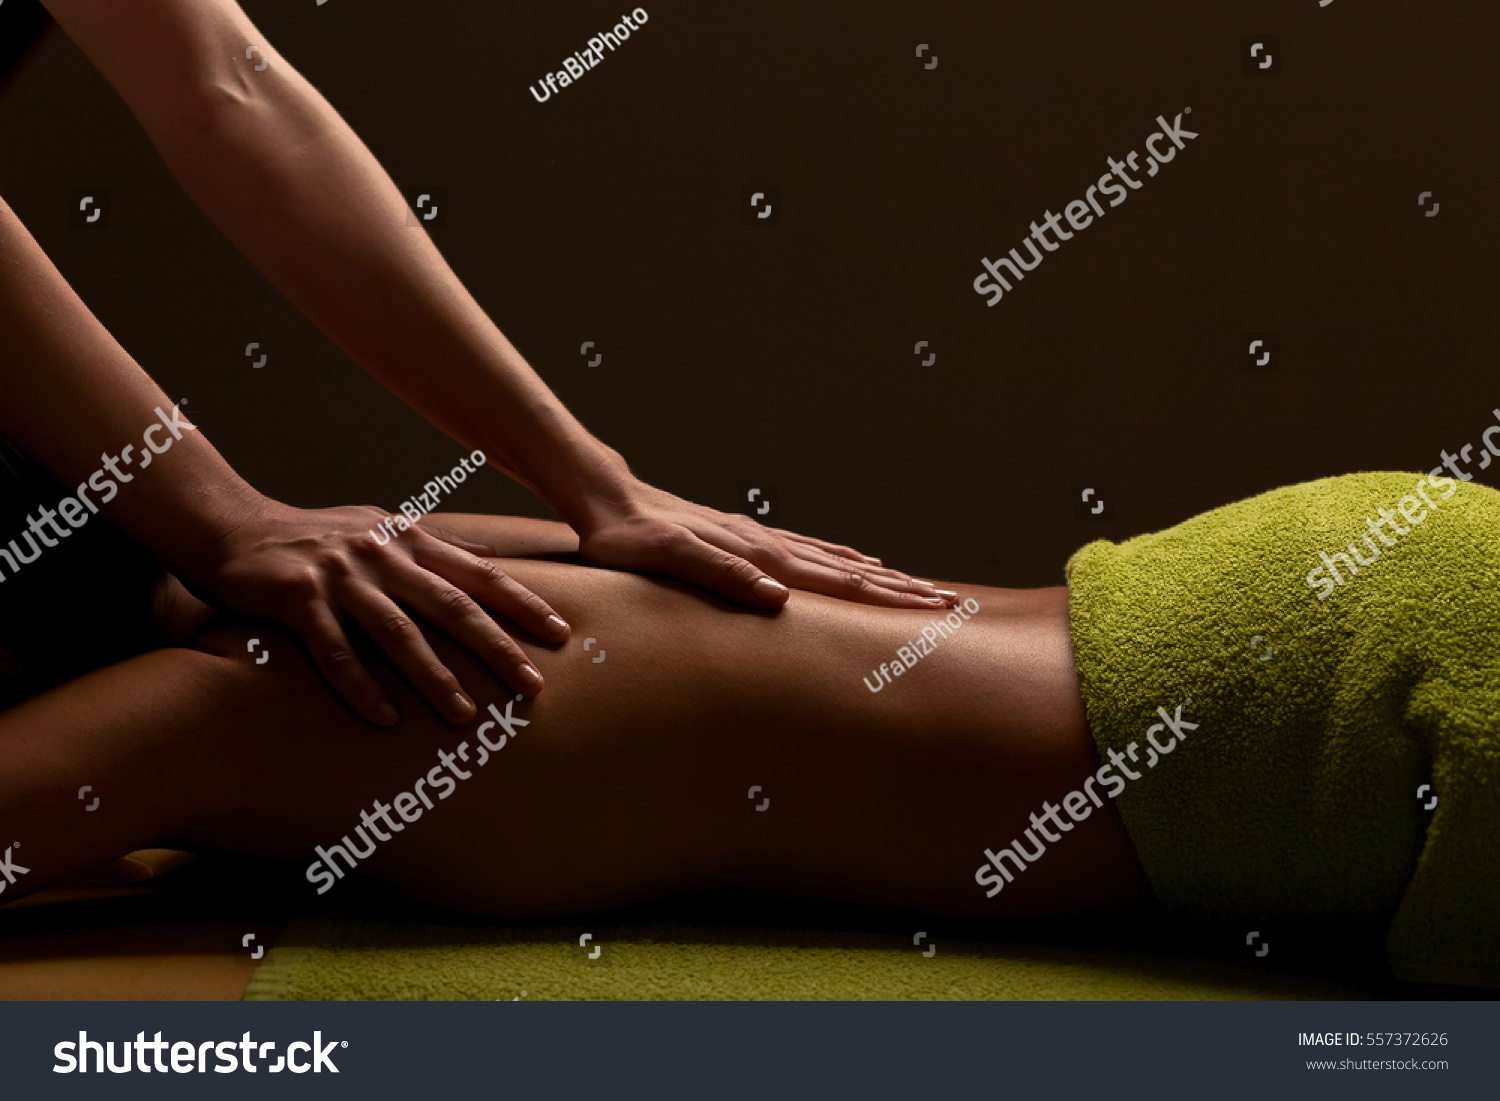 close-up masseur hands doing back massage in spa center. low key photo #557372626